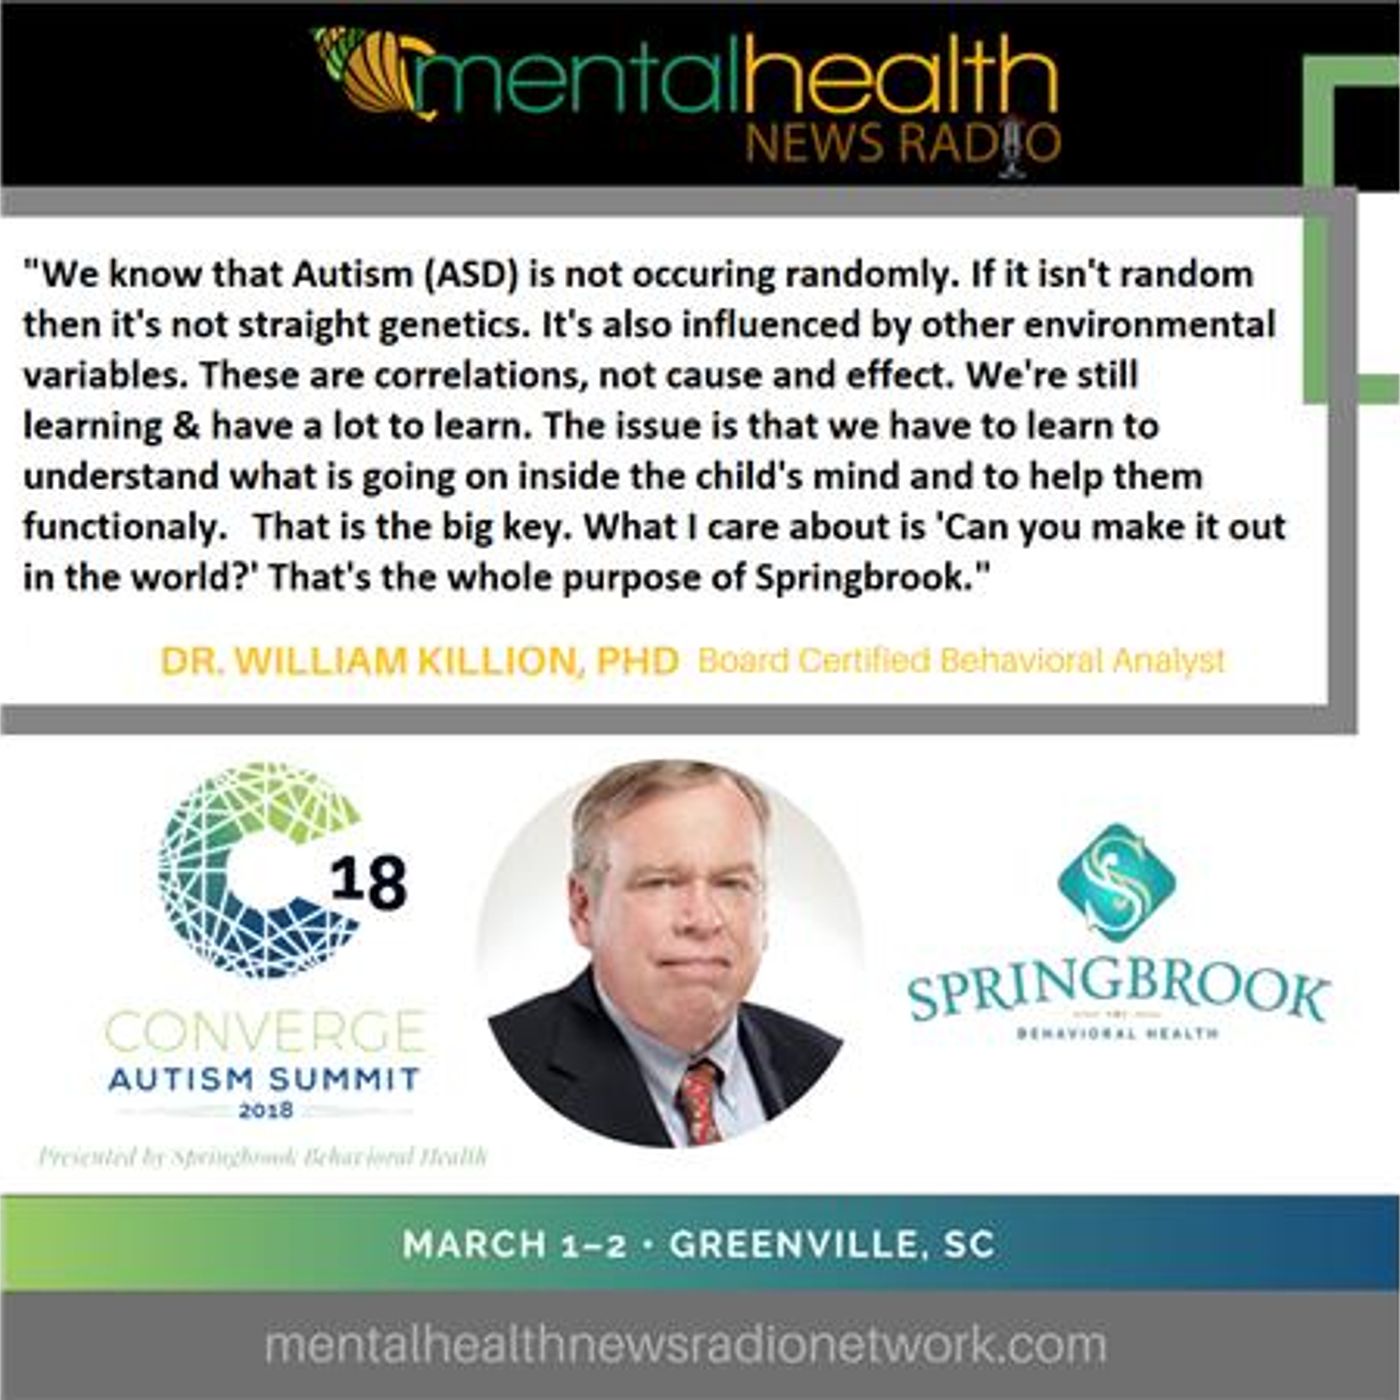 Mental Health News Radio - Making It Out In The World with Autism Spectrum Disorder: Dr. William Killion